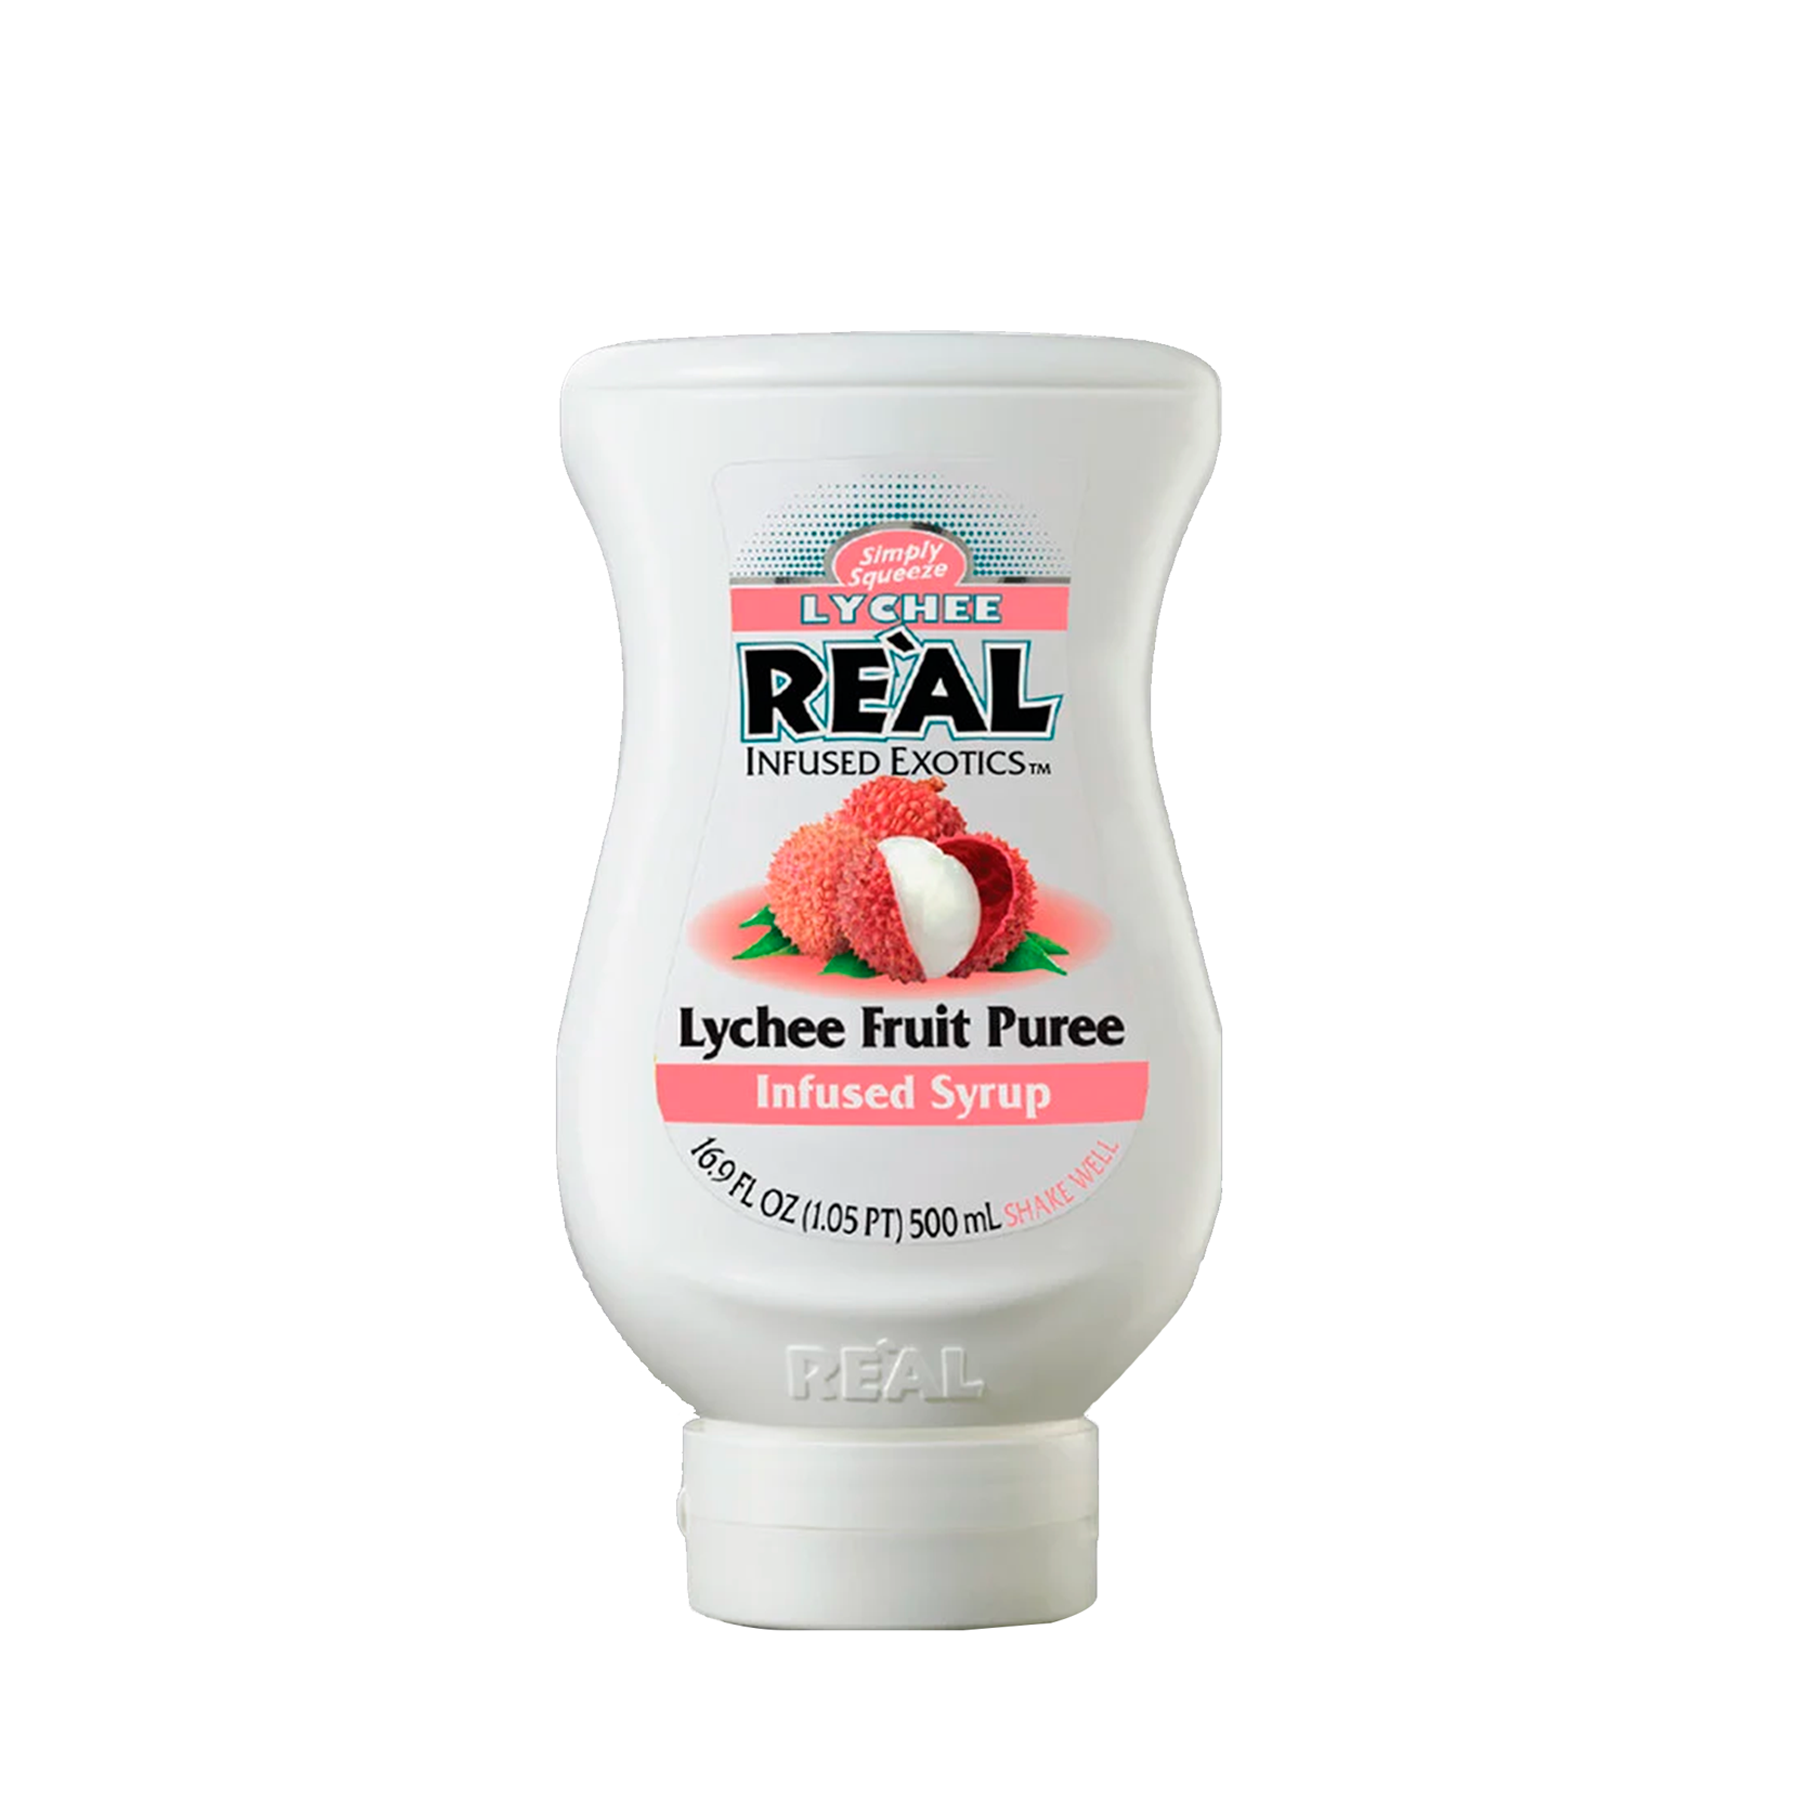 REAL LYCHEE REAL 500 MLT